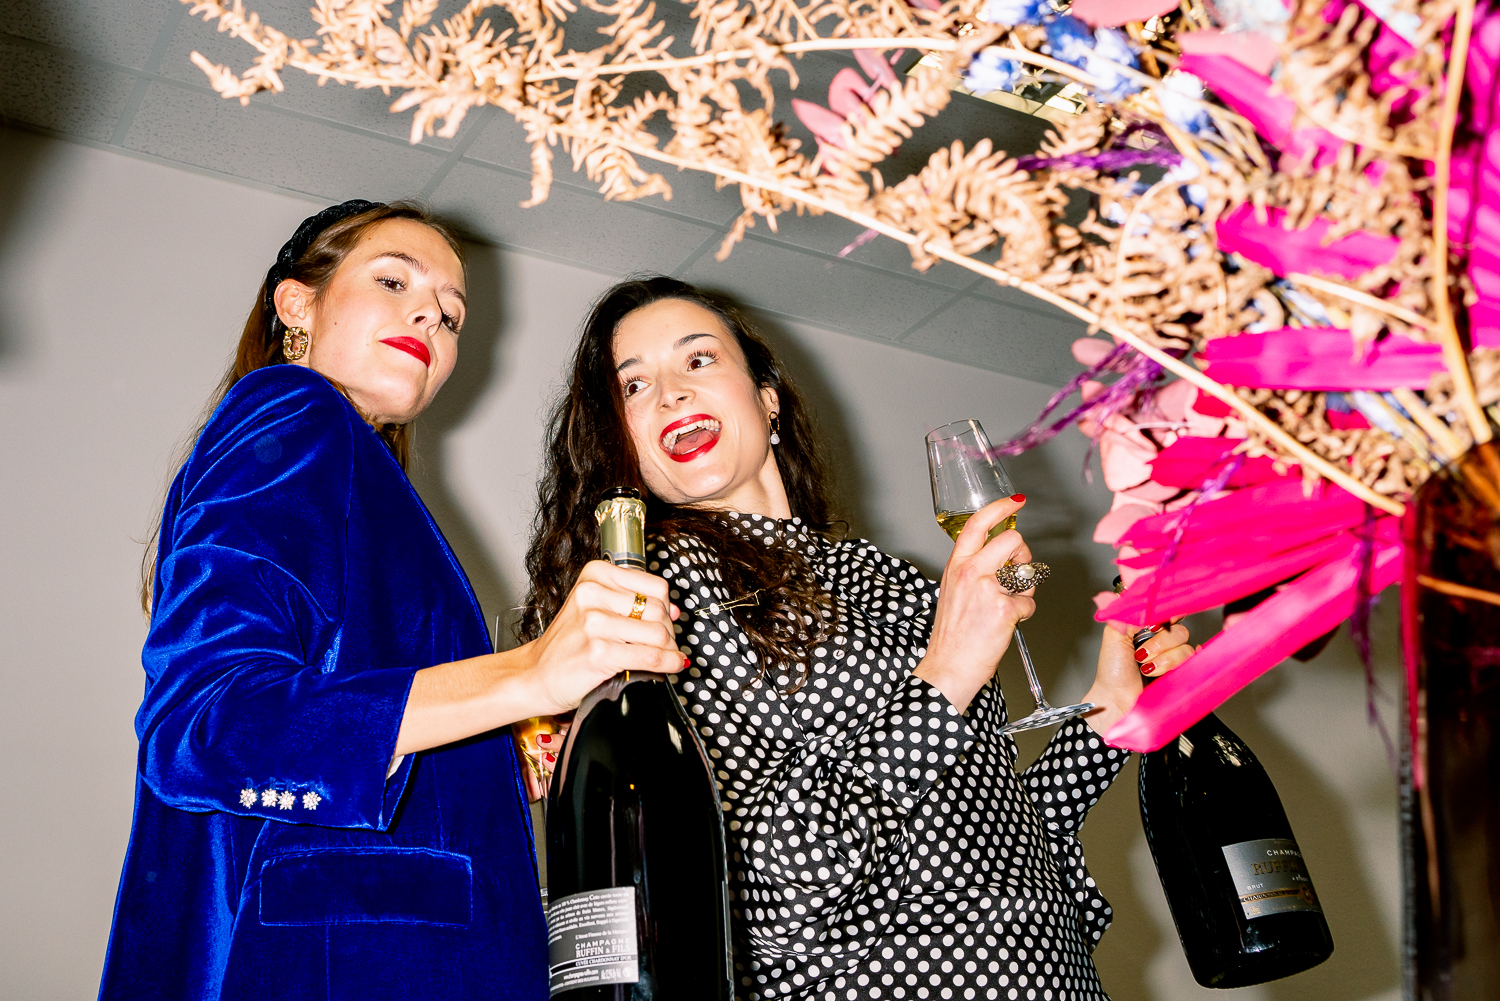 Drinking champagne – the right way